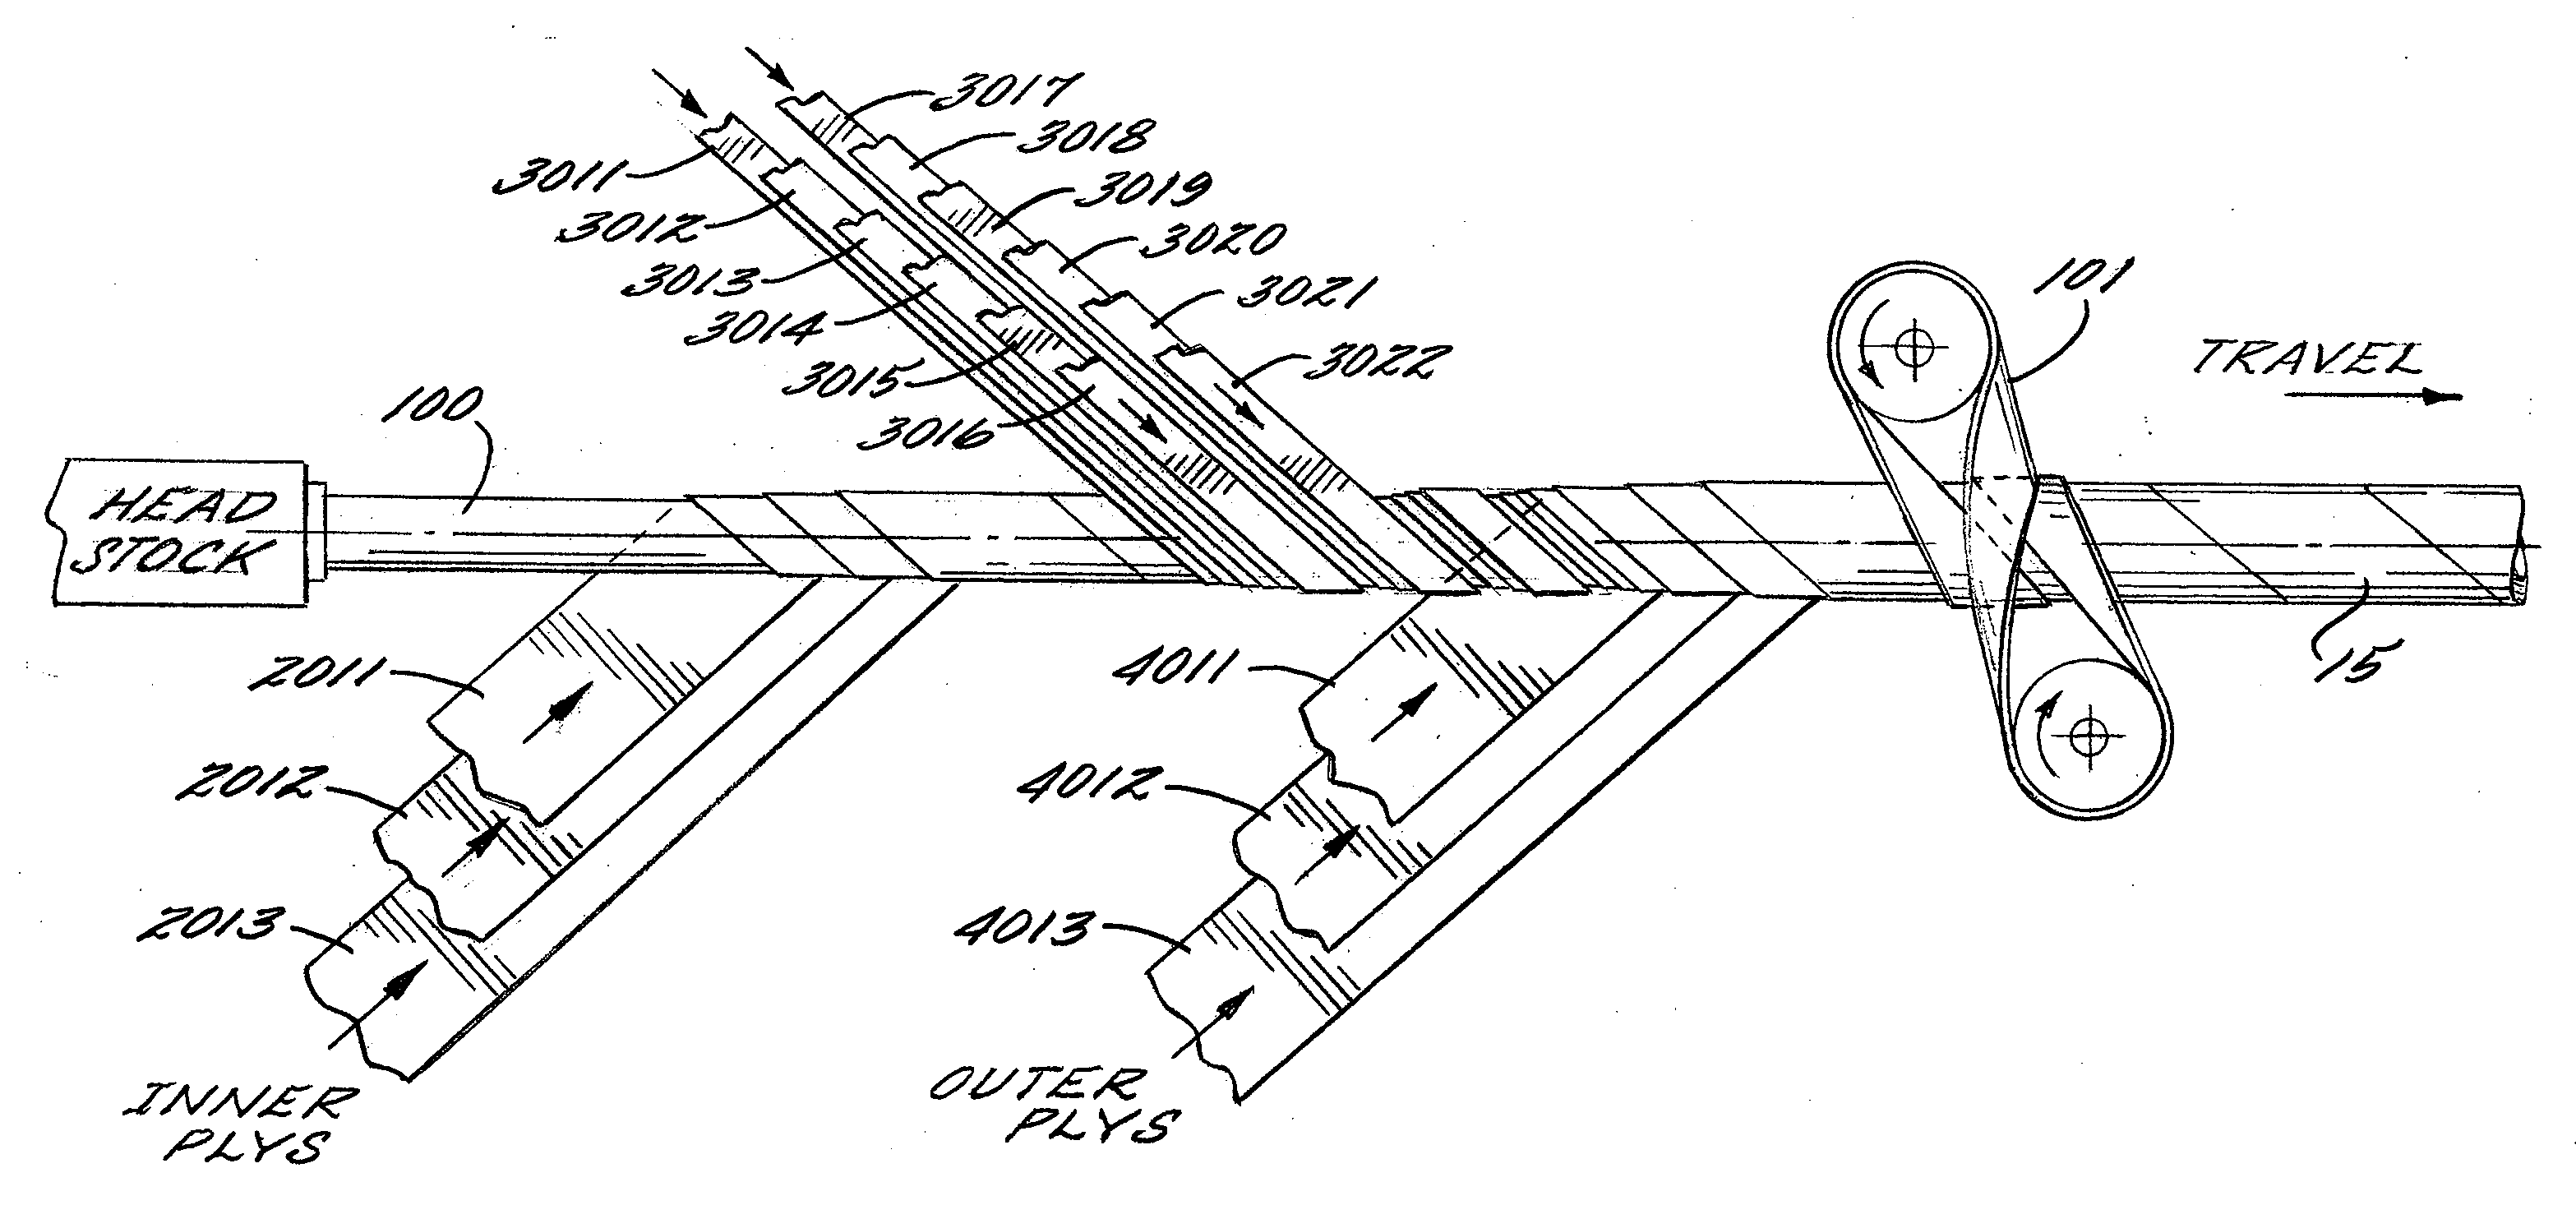 Spirally Wound Tube With Voids And Method For Manufacturing The Same